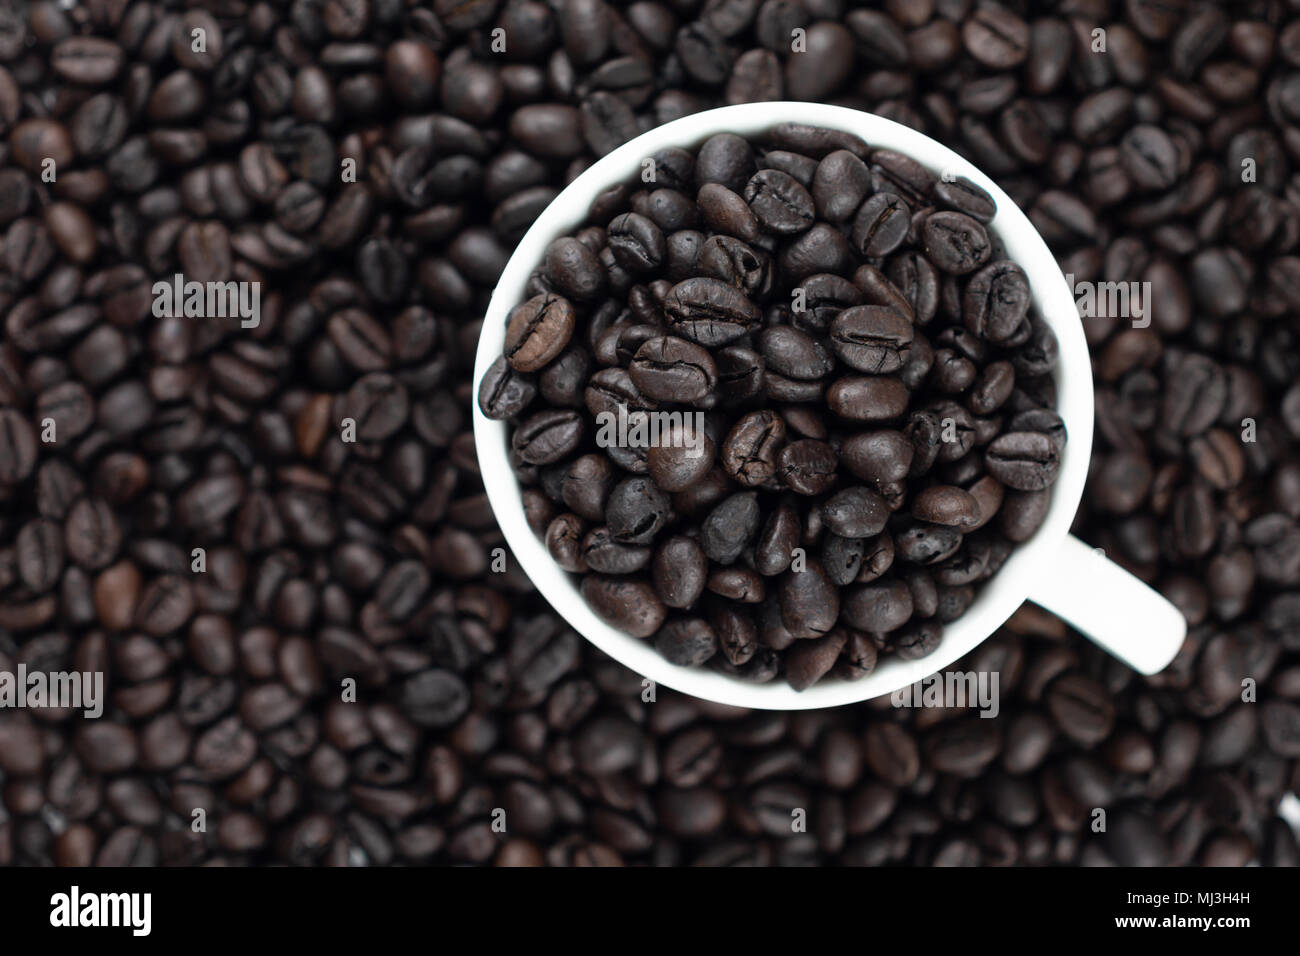 Roasted coffee beans in white glass. Placed on the coffee background and texture. Select focus shallow depth of field. Blurred background Stock Photo